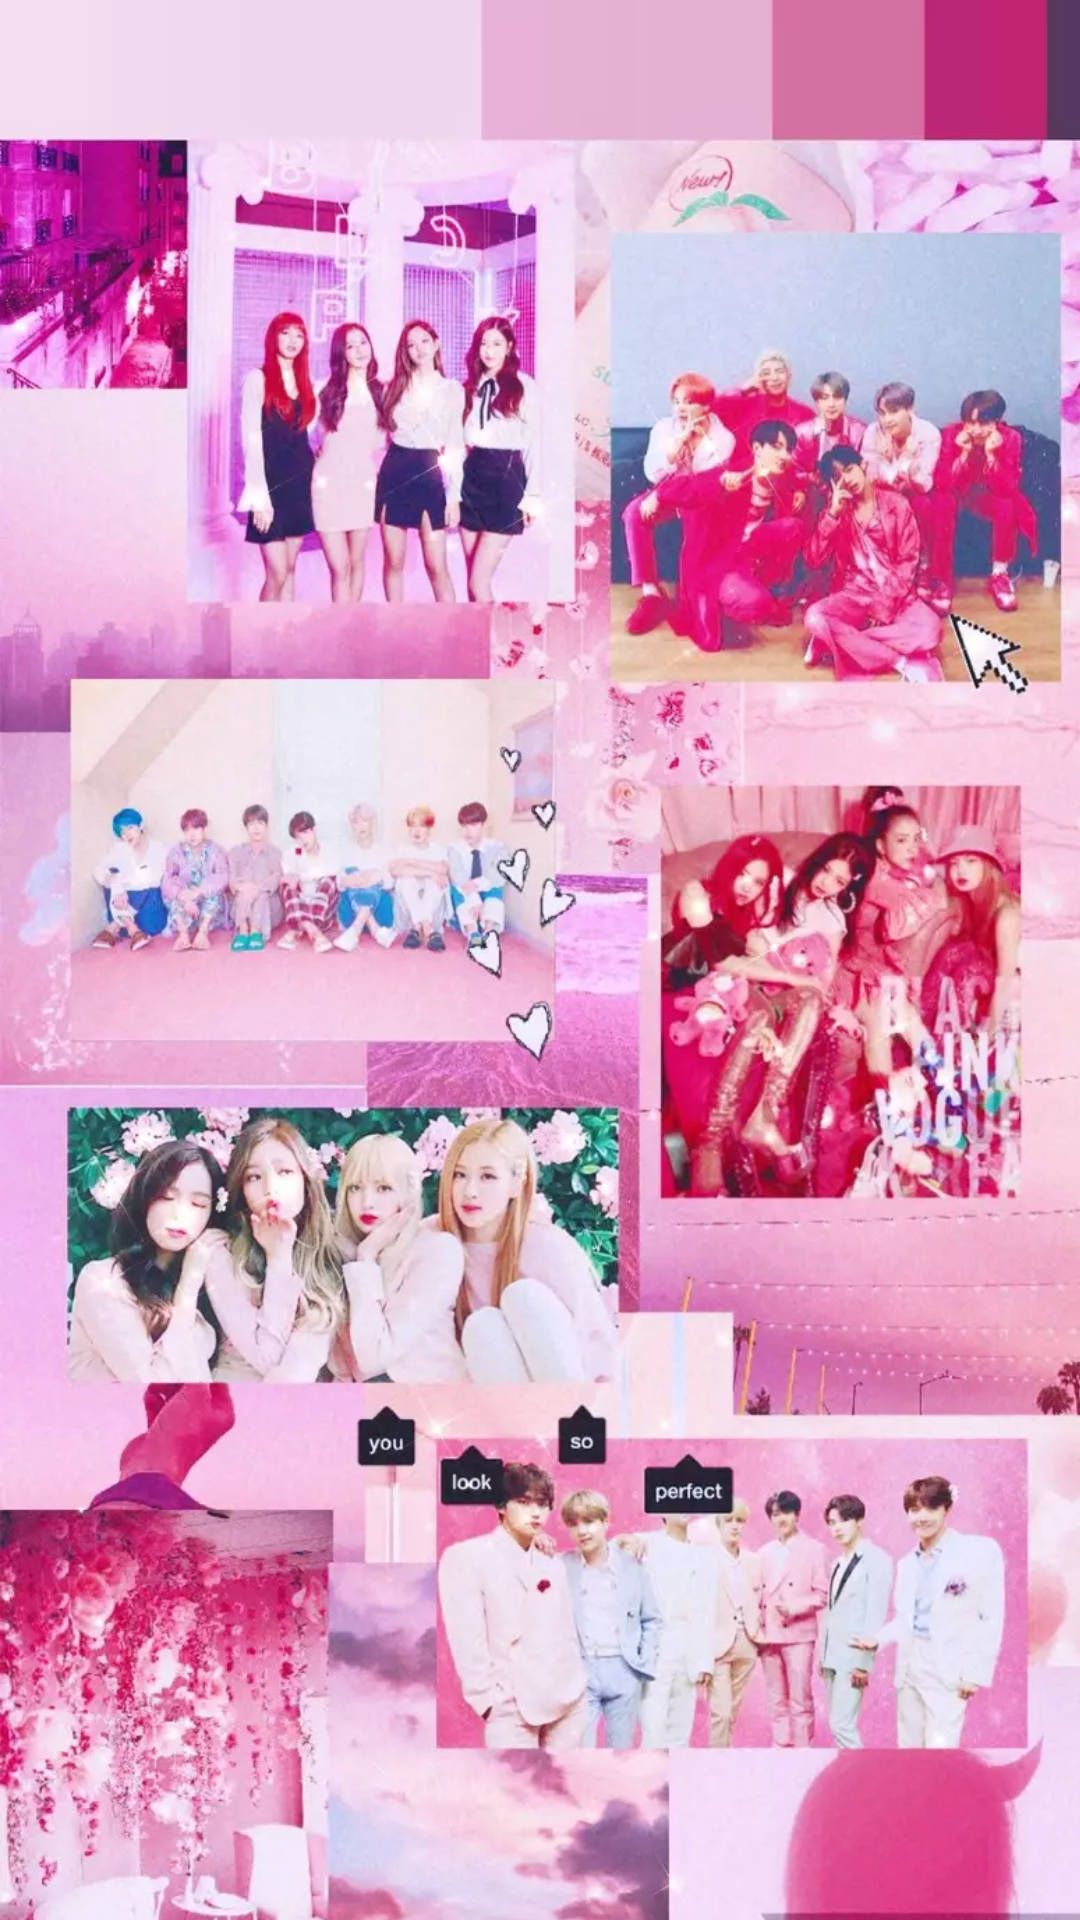 Download Bts And Blackpink Pink Aesthetic Collage Wallpaper